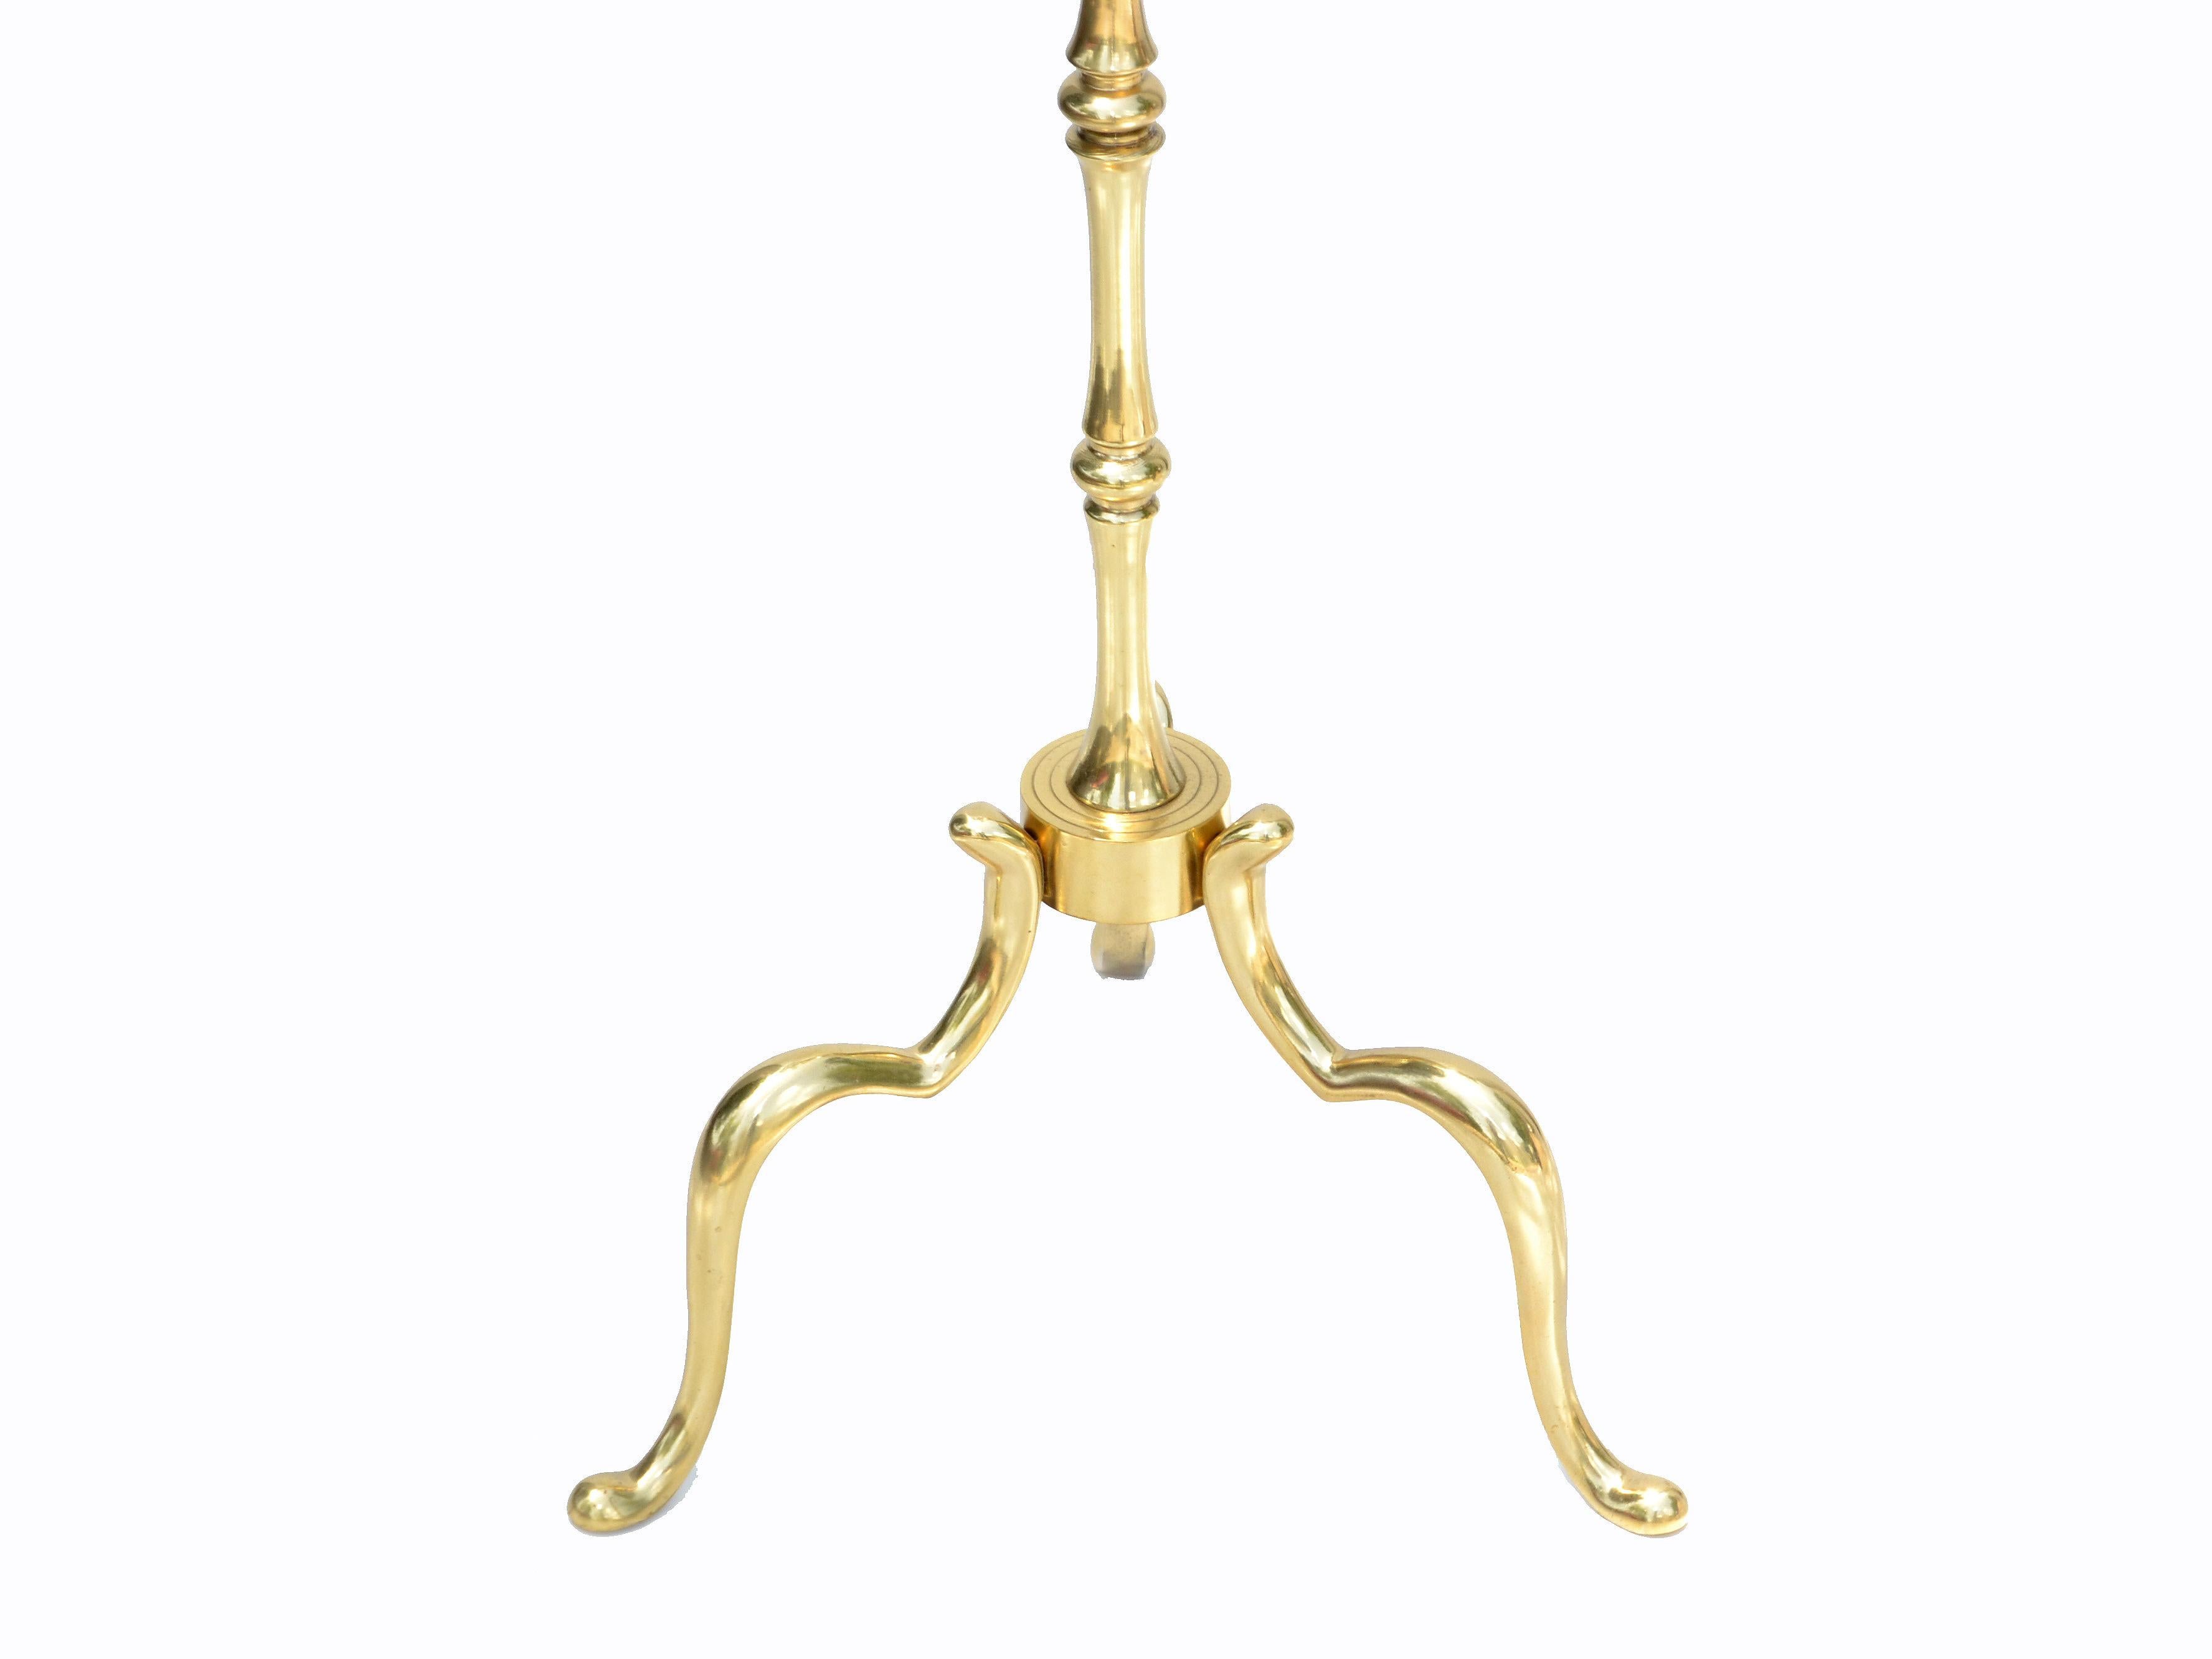 Maison Baguès French Neoclassical Bronze Bamboo Floor Lamp For Sale 5